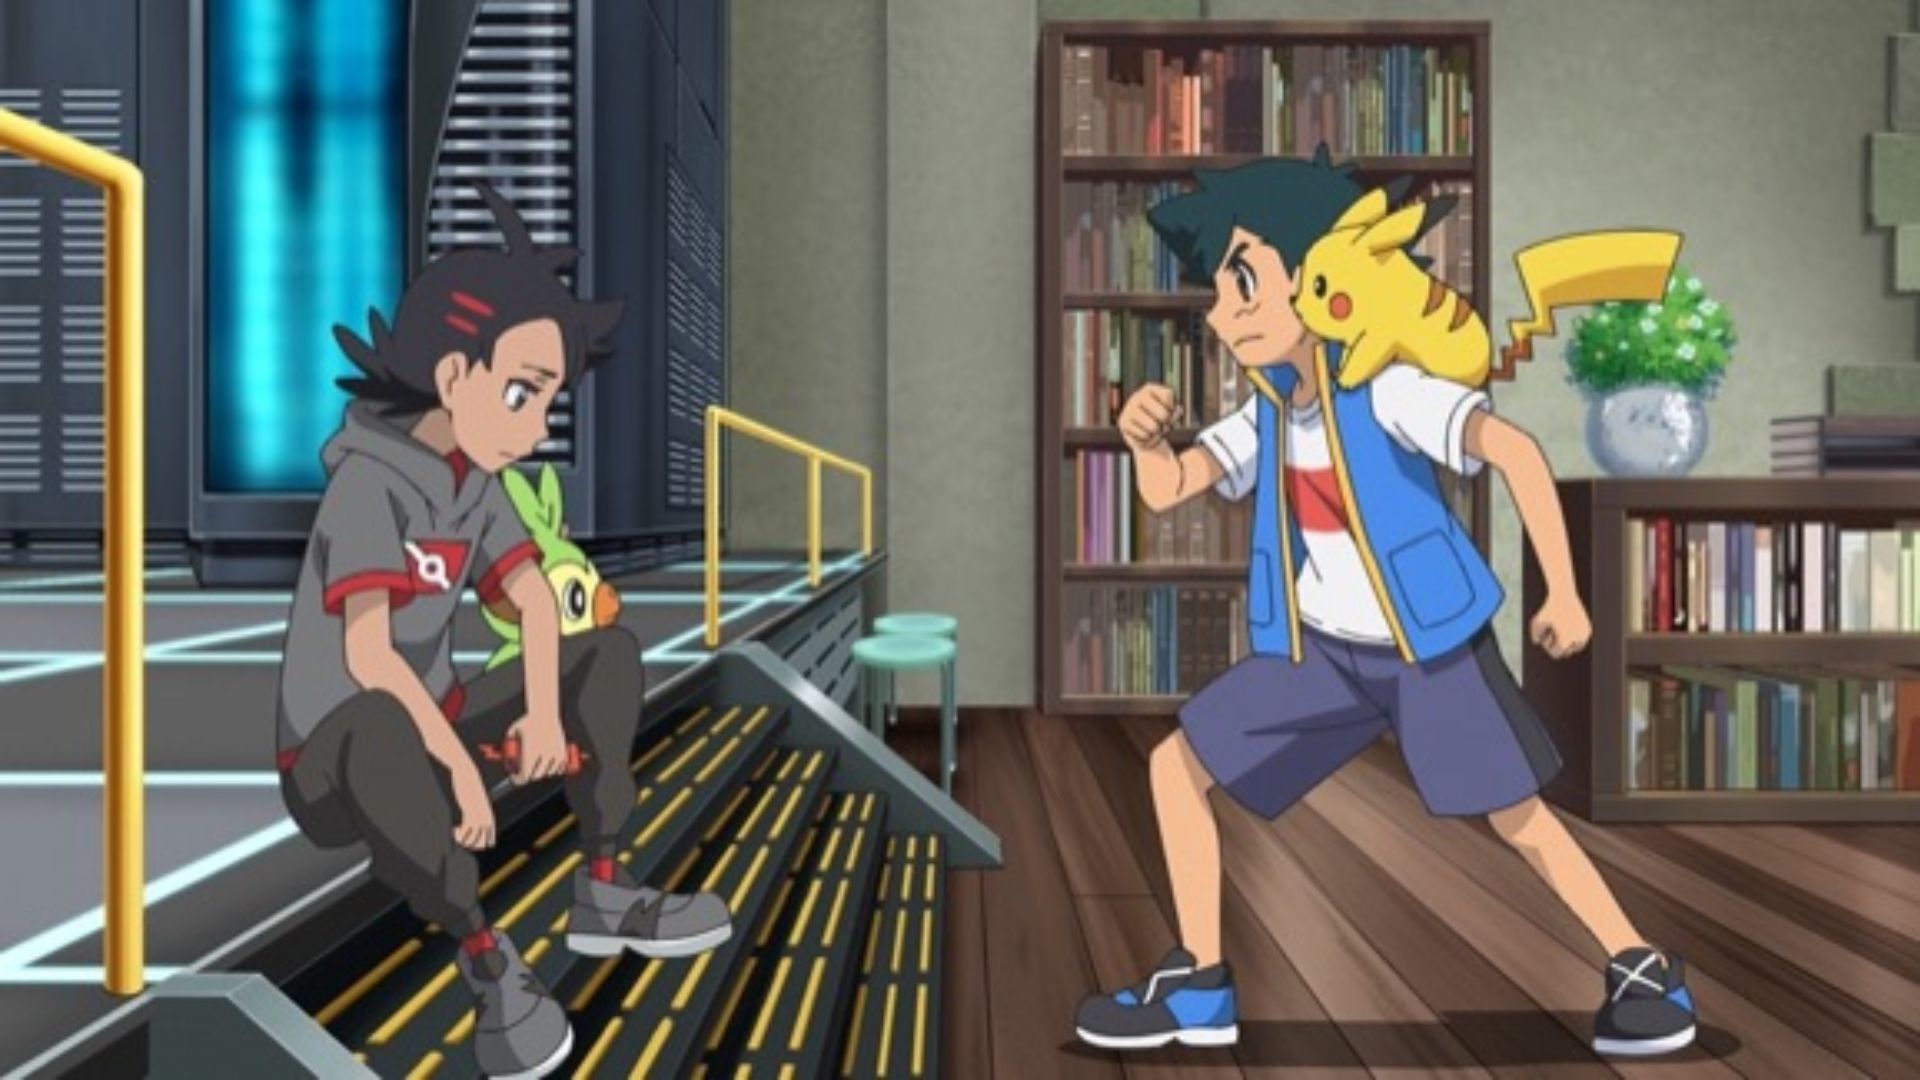 Pokémon' Says Goodbye to Ash Ketchum With 2023 Series Featuring Two New  Trainers